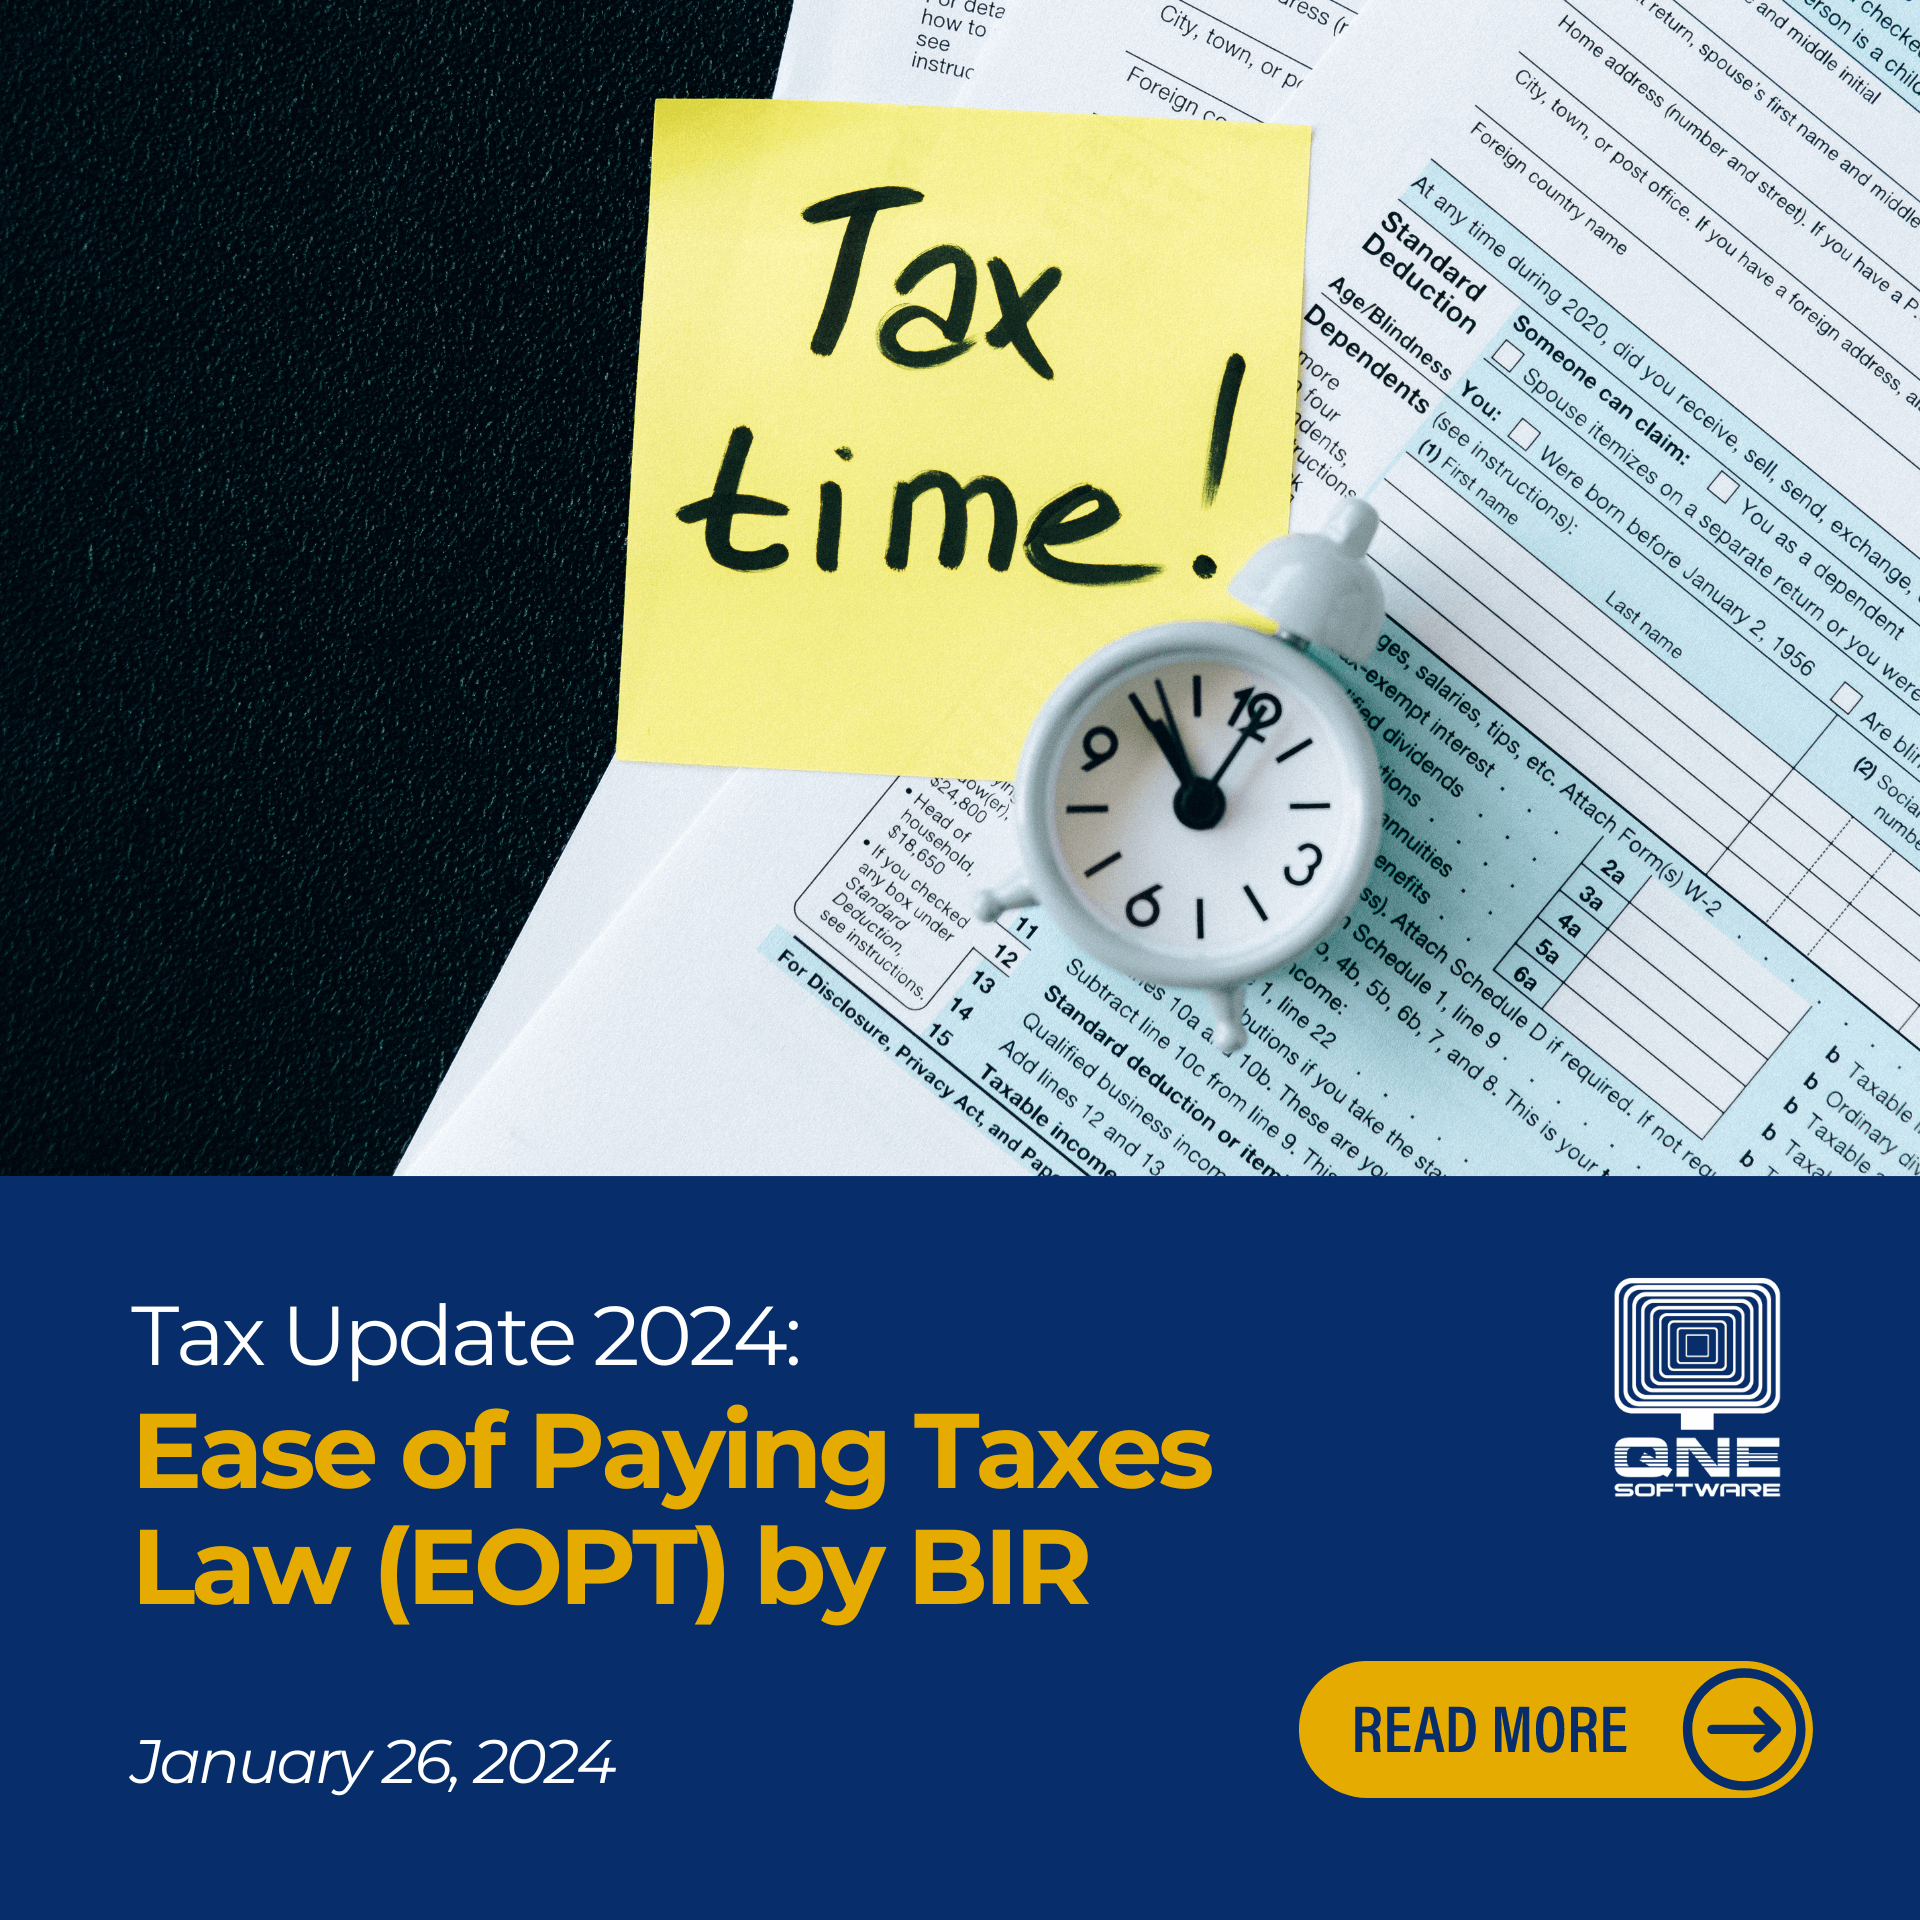 Ease of Paying Taxes